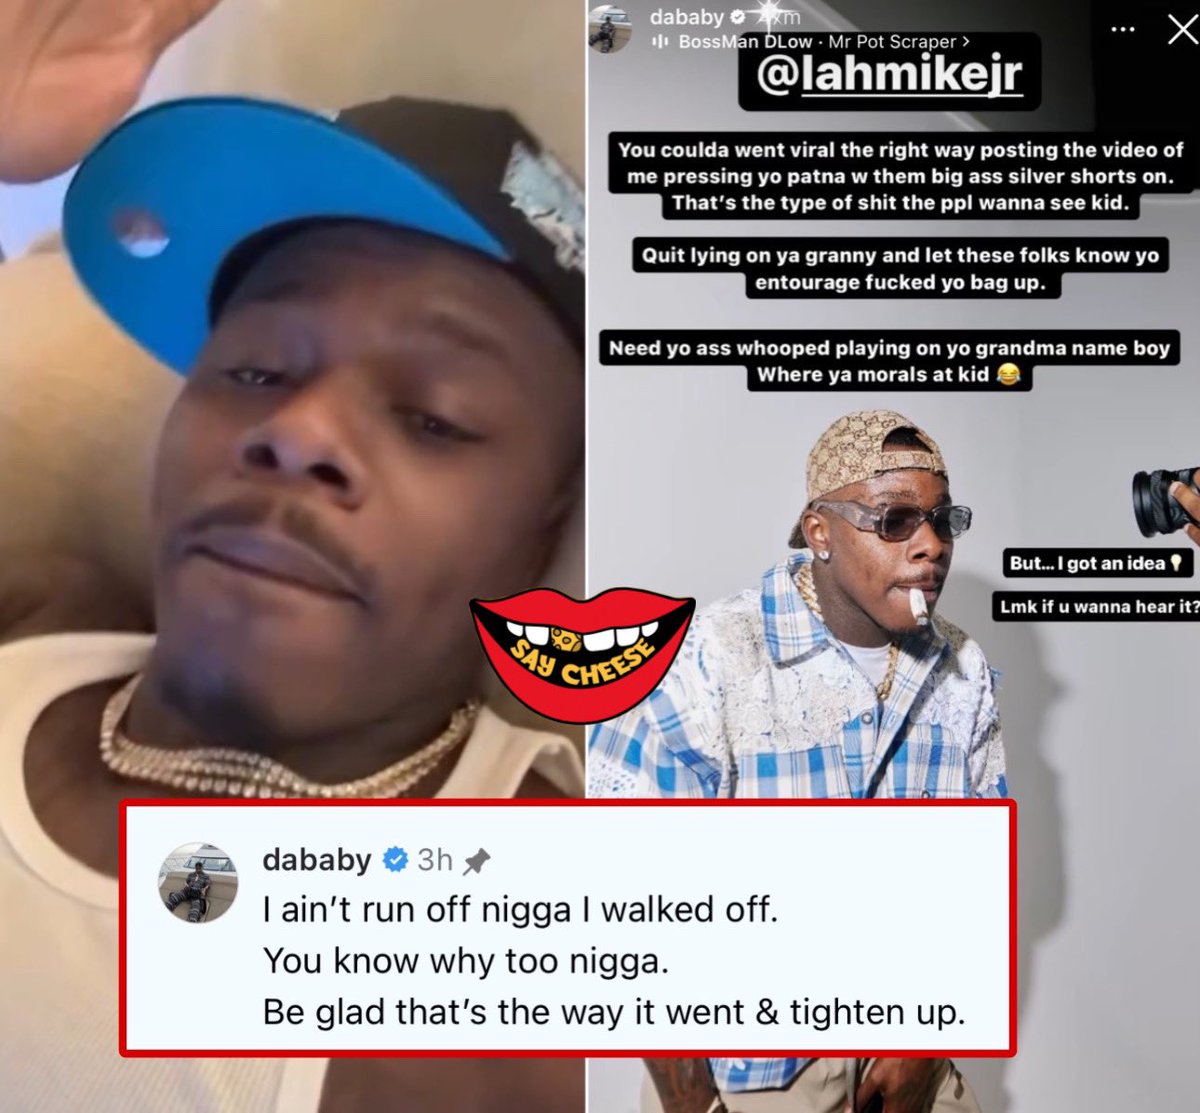 DaBaby responds to a YouTuber's claim that he ran off with $20,000: “I ain’t run off n**** I walked off”